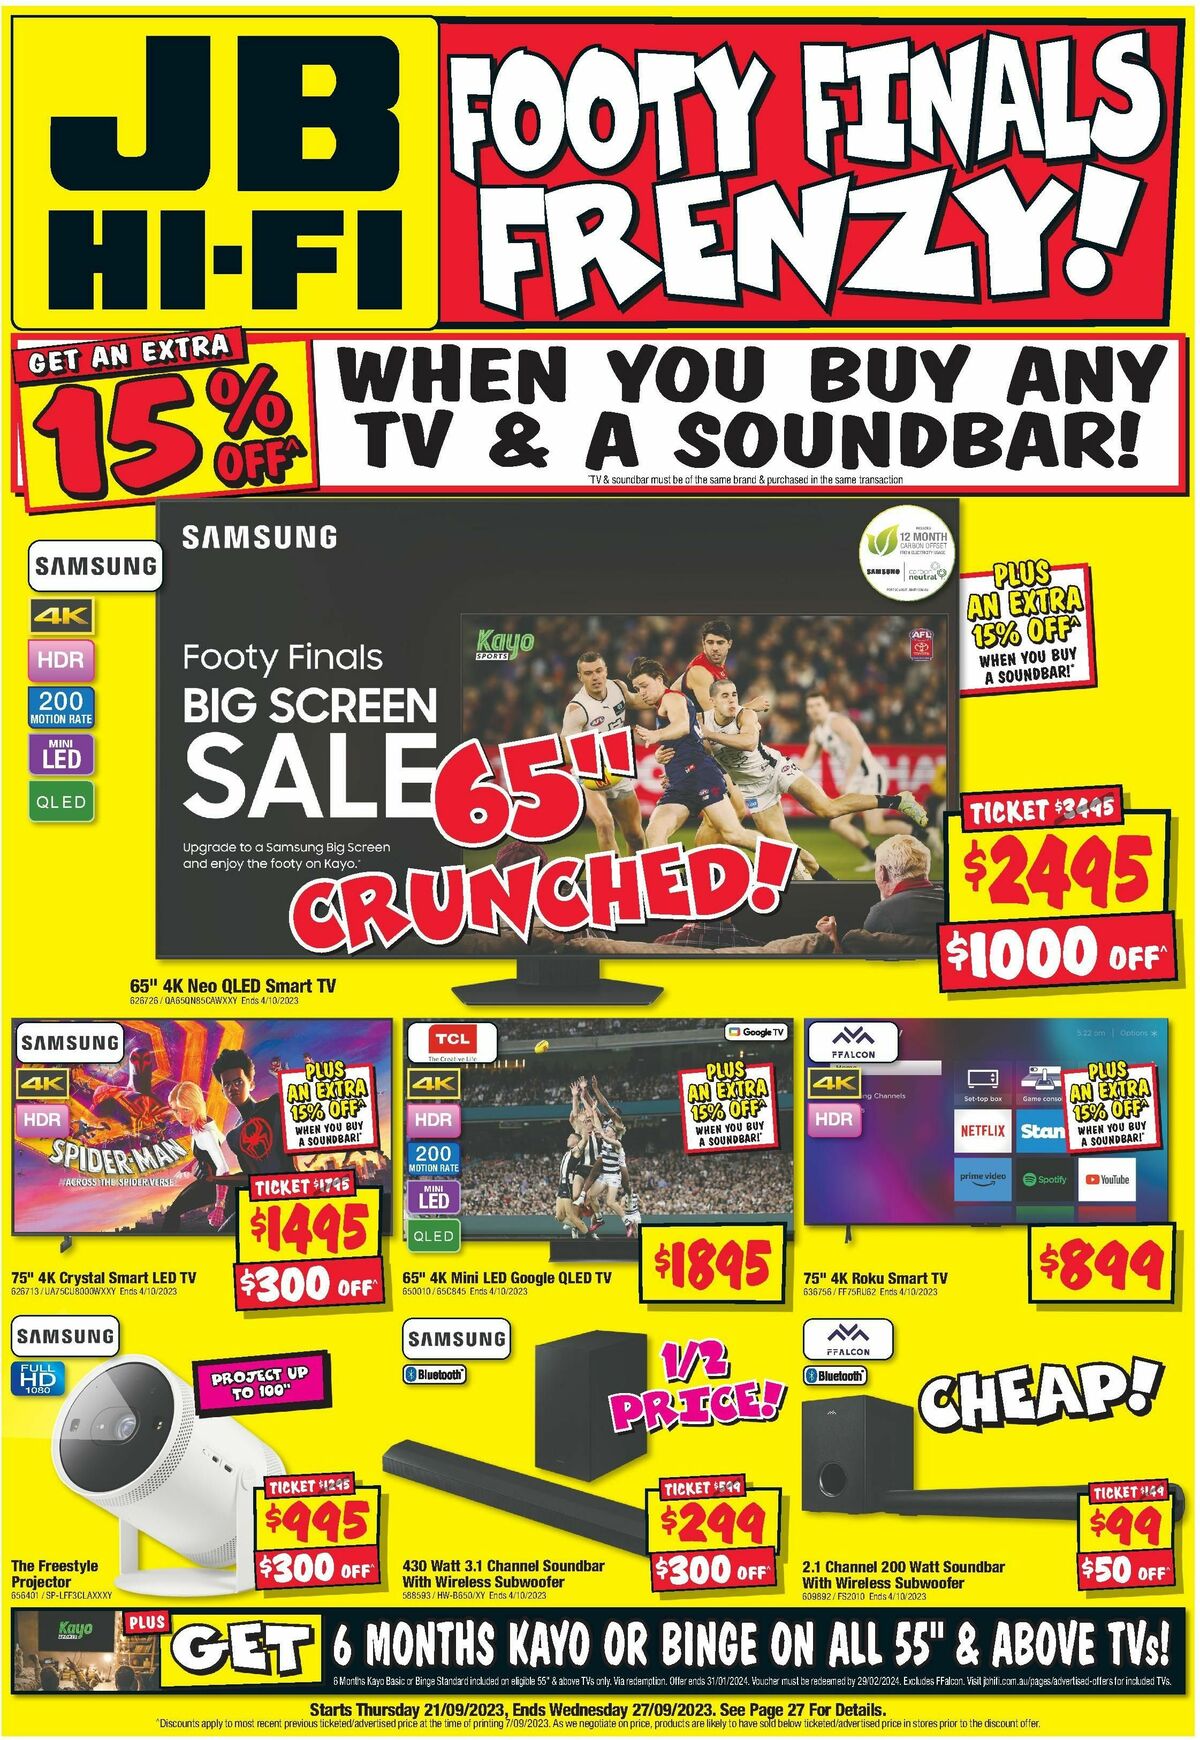 JB Hi-Fi Footy Finals Frenzy Catalogues from 21 September